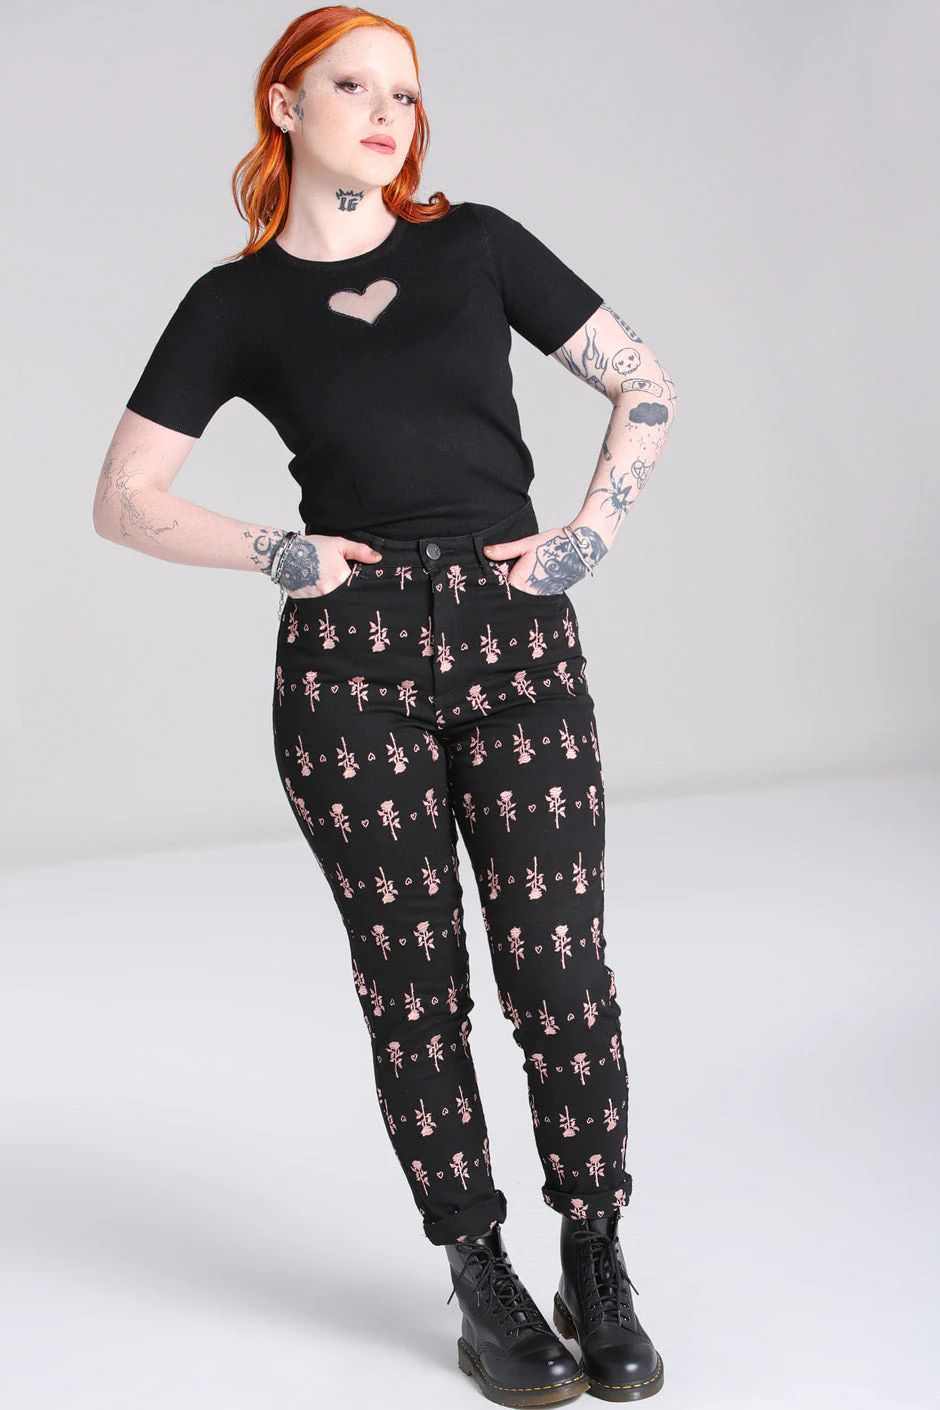 PS50301b-jeans-pantalon-hell-bunny-gothique-rock-the-lover